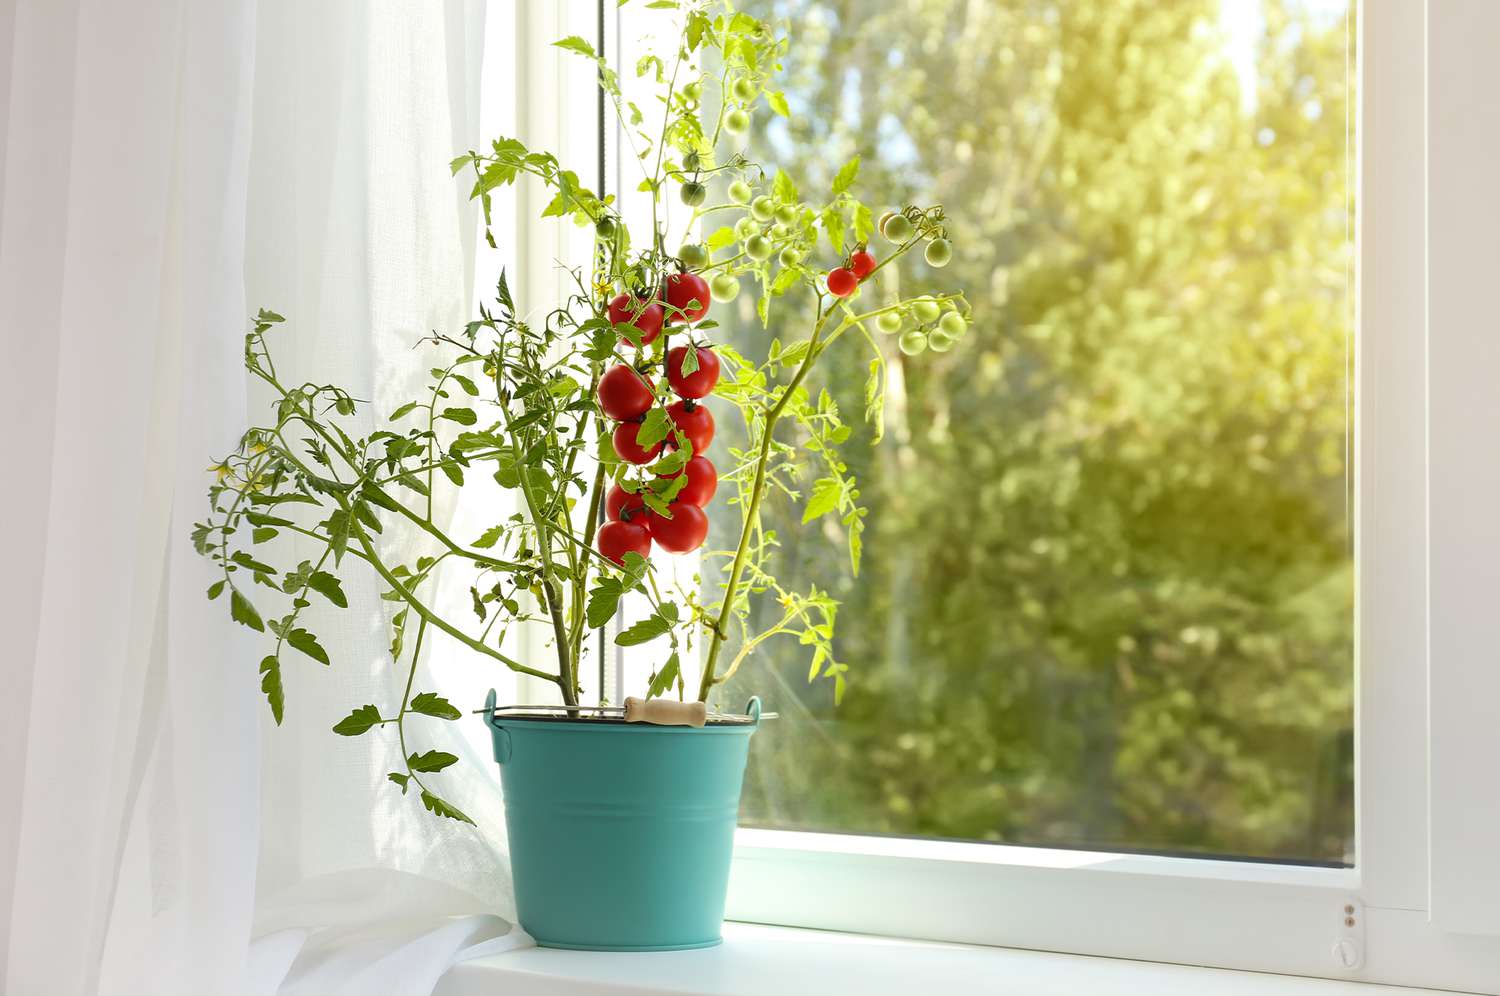 Growing Tomatoes Indoors During Winter: All You Need to Know